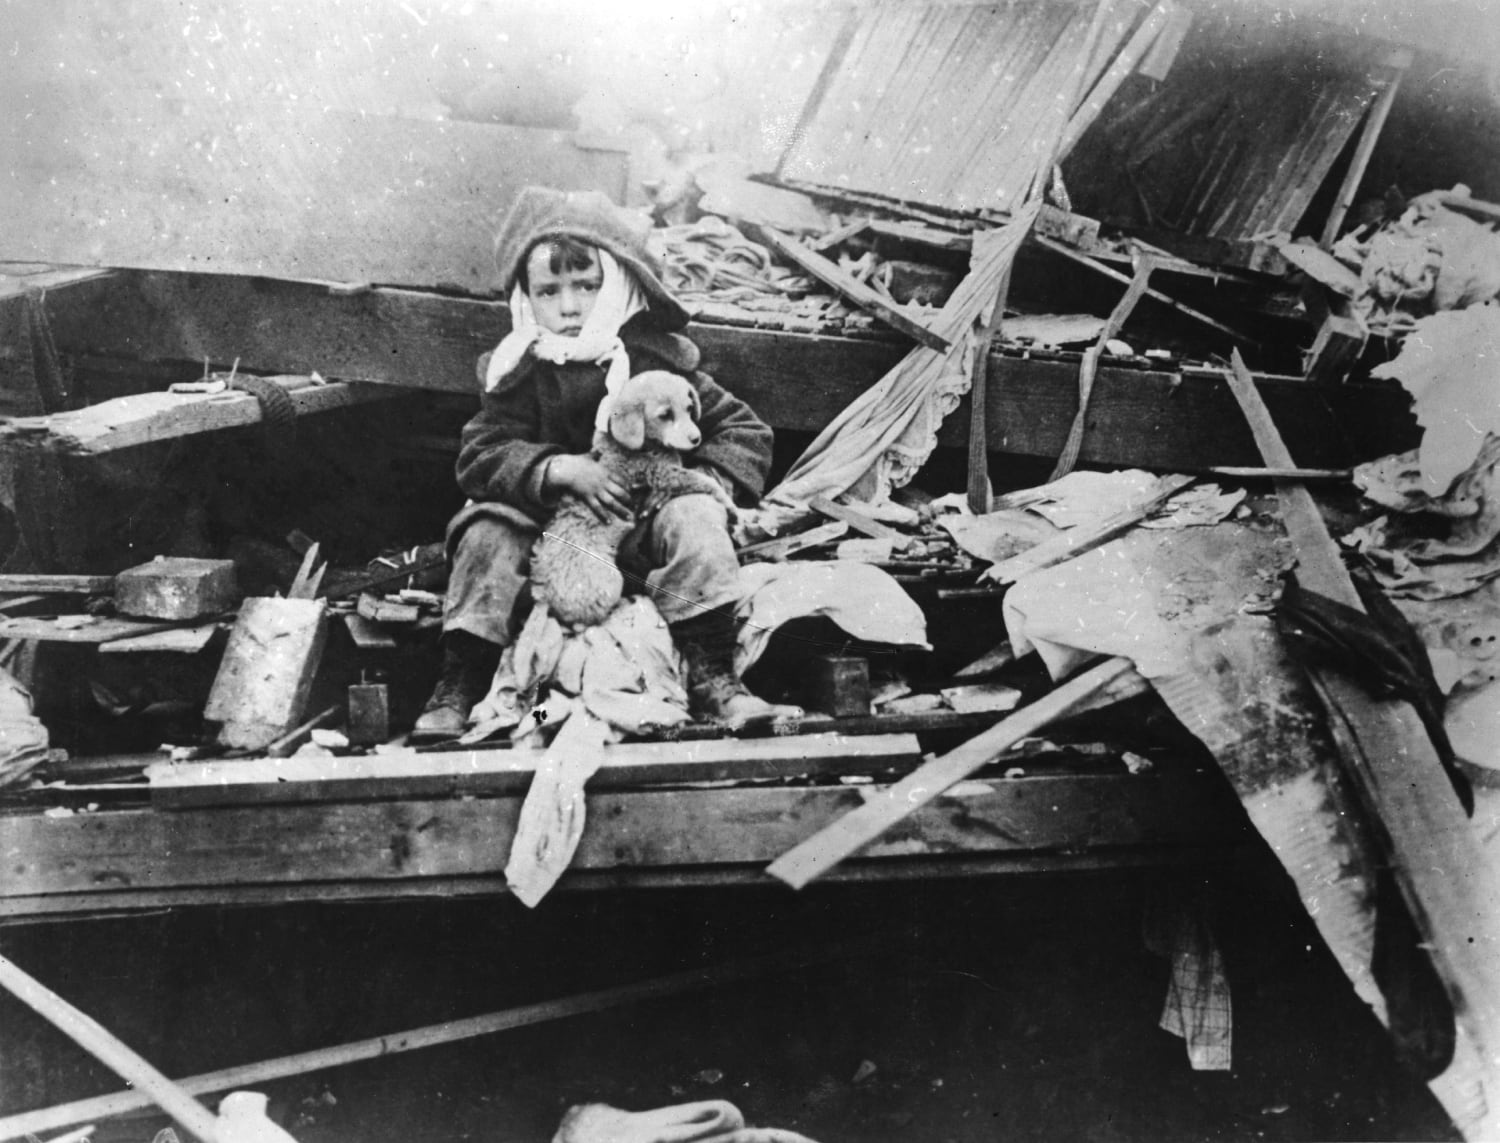 Boy and his puppy amid the wreckage of Murphysboro, Illinois after the passage of the infamous Tri State tornado. It was the single deadliest tornado of all time, killing 695 people and leaving 15,000 homeless. March 1925